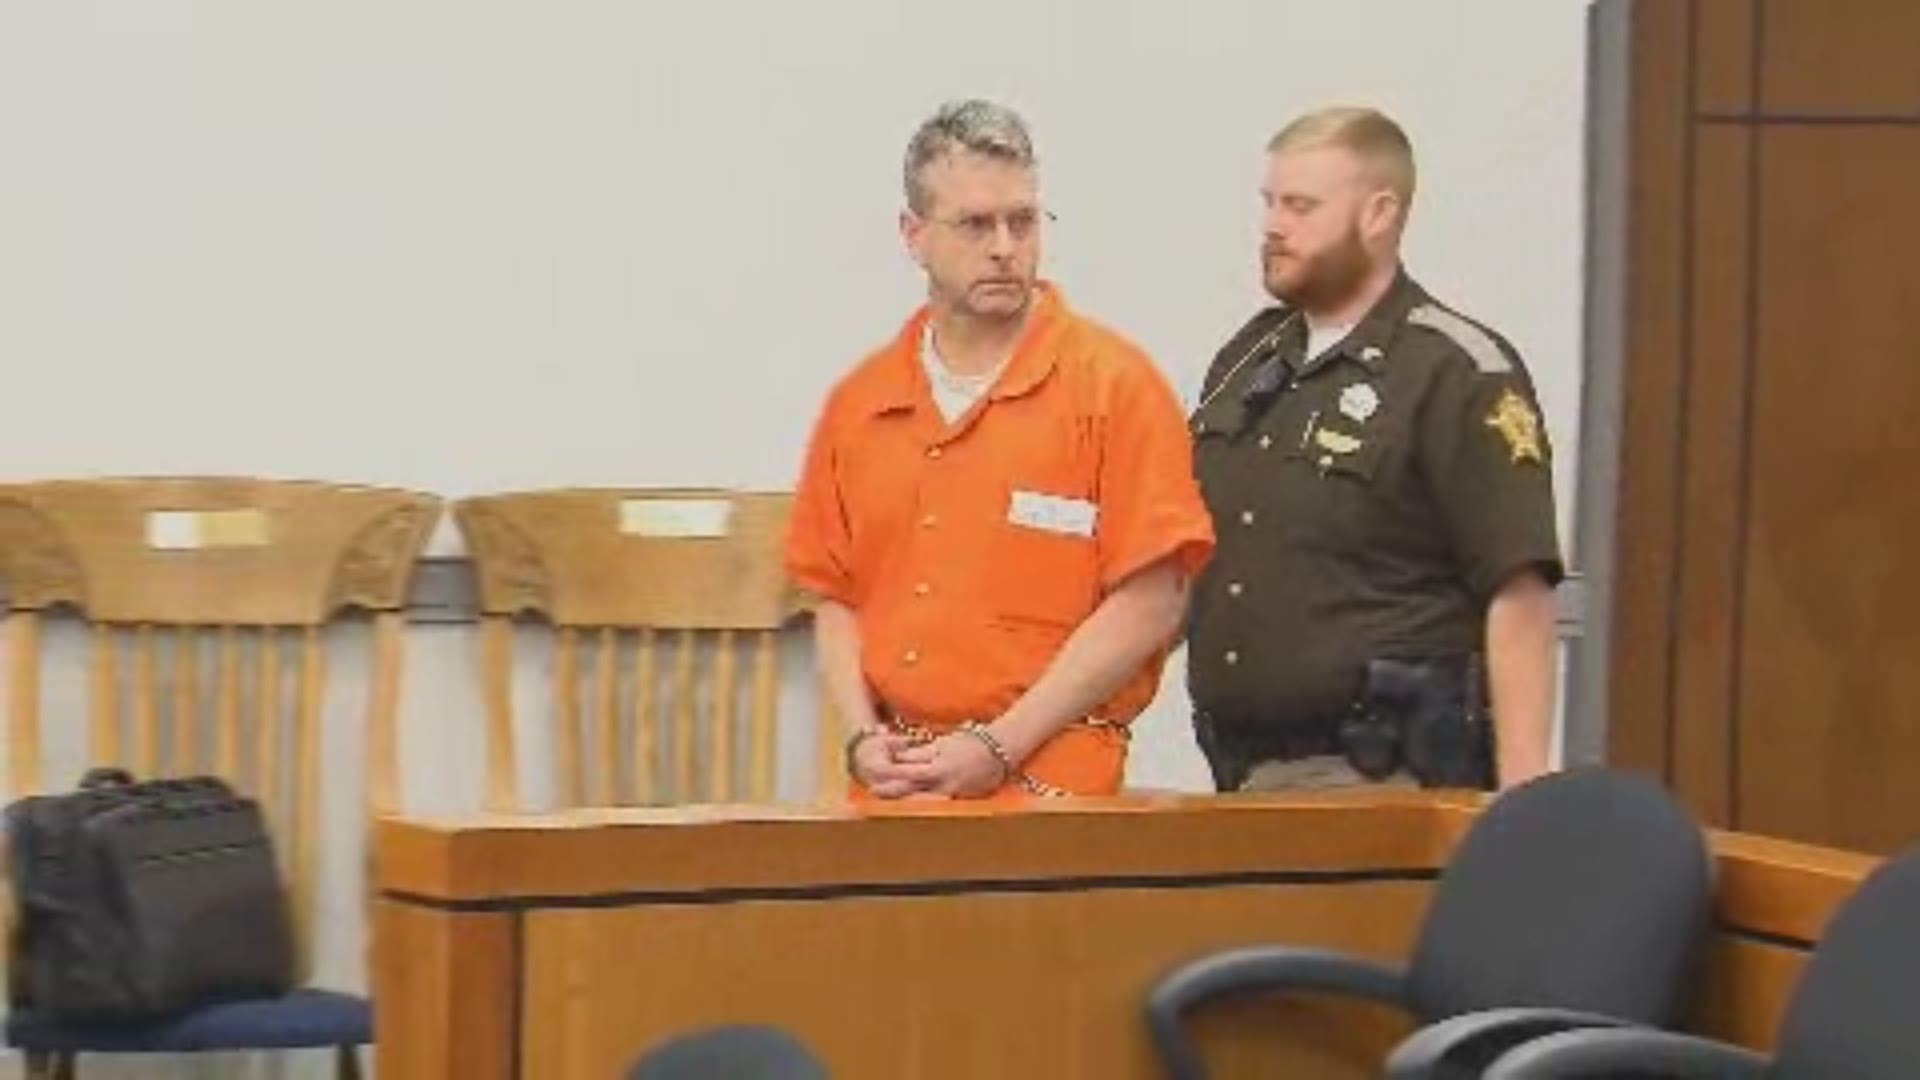 Christian Martin appeared in court in May 2019. On June 16, 2021, he was found guilty of killing Edward Dansereau and Calvin and Pamela Phillips.